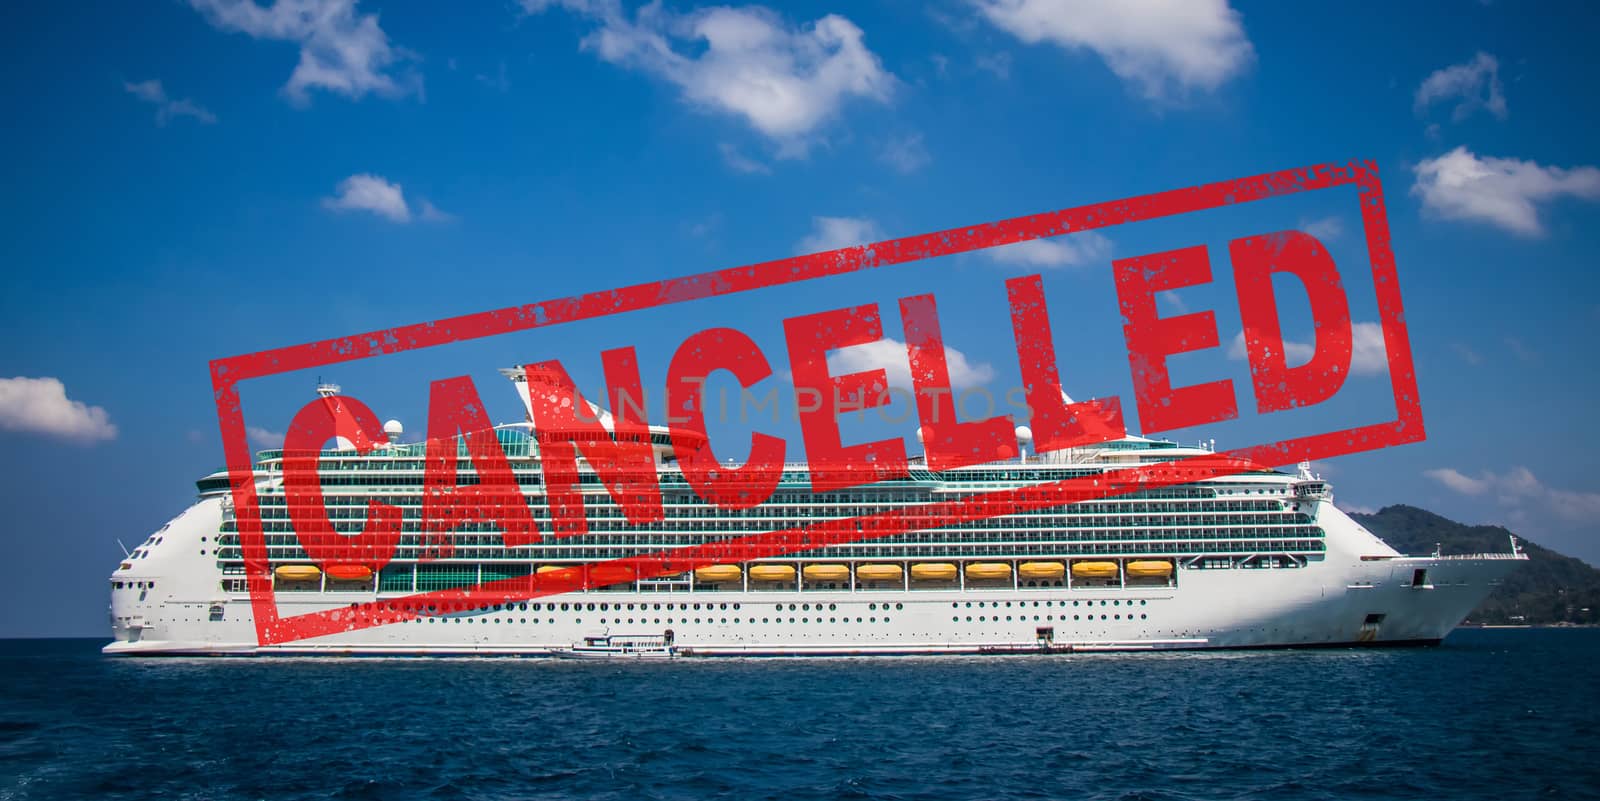 cruise trip cancellation. travel holidays by cruise ship was can by asiandelight